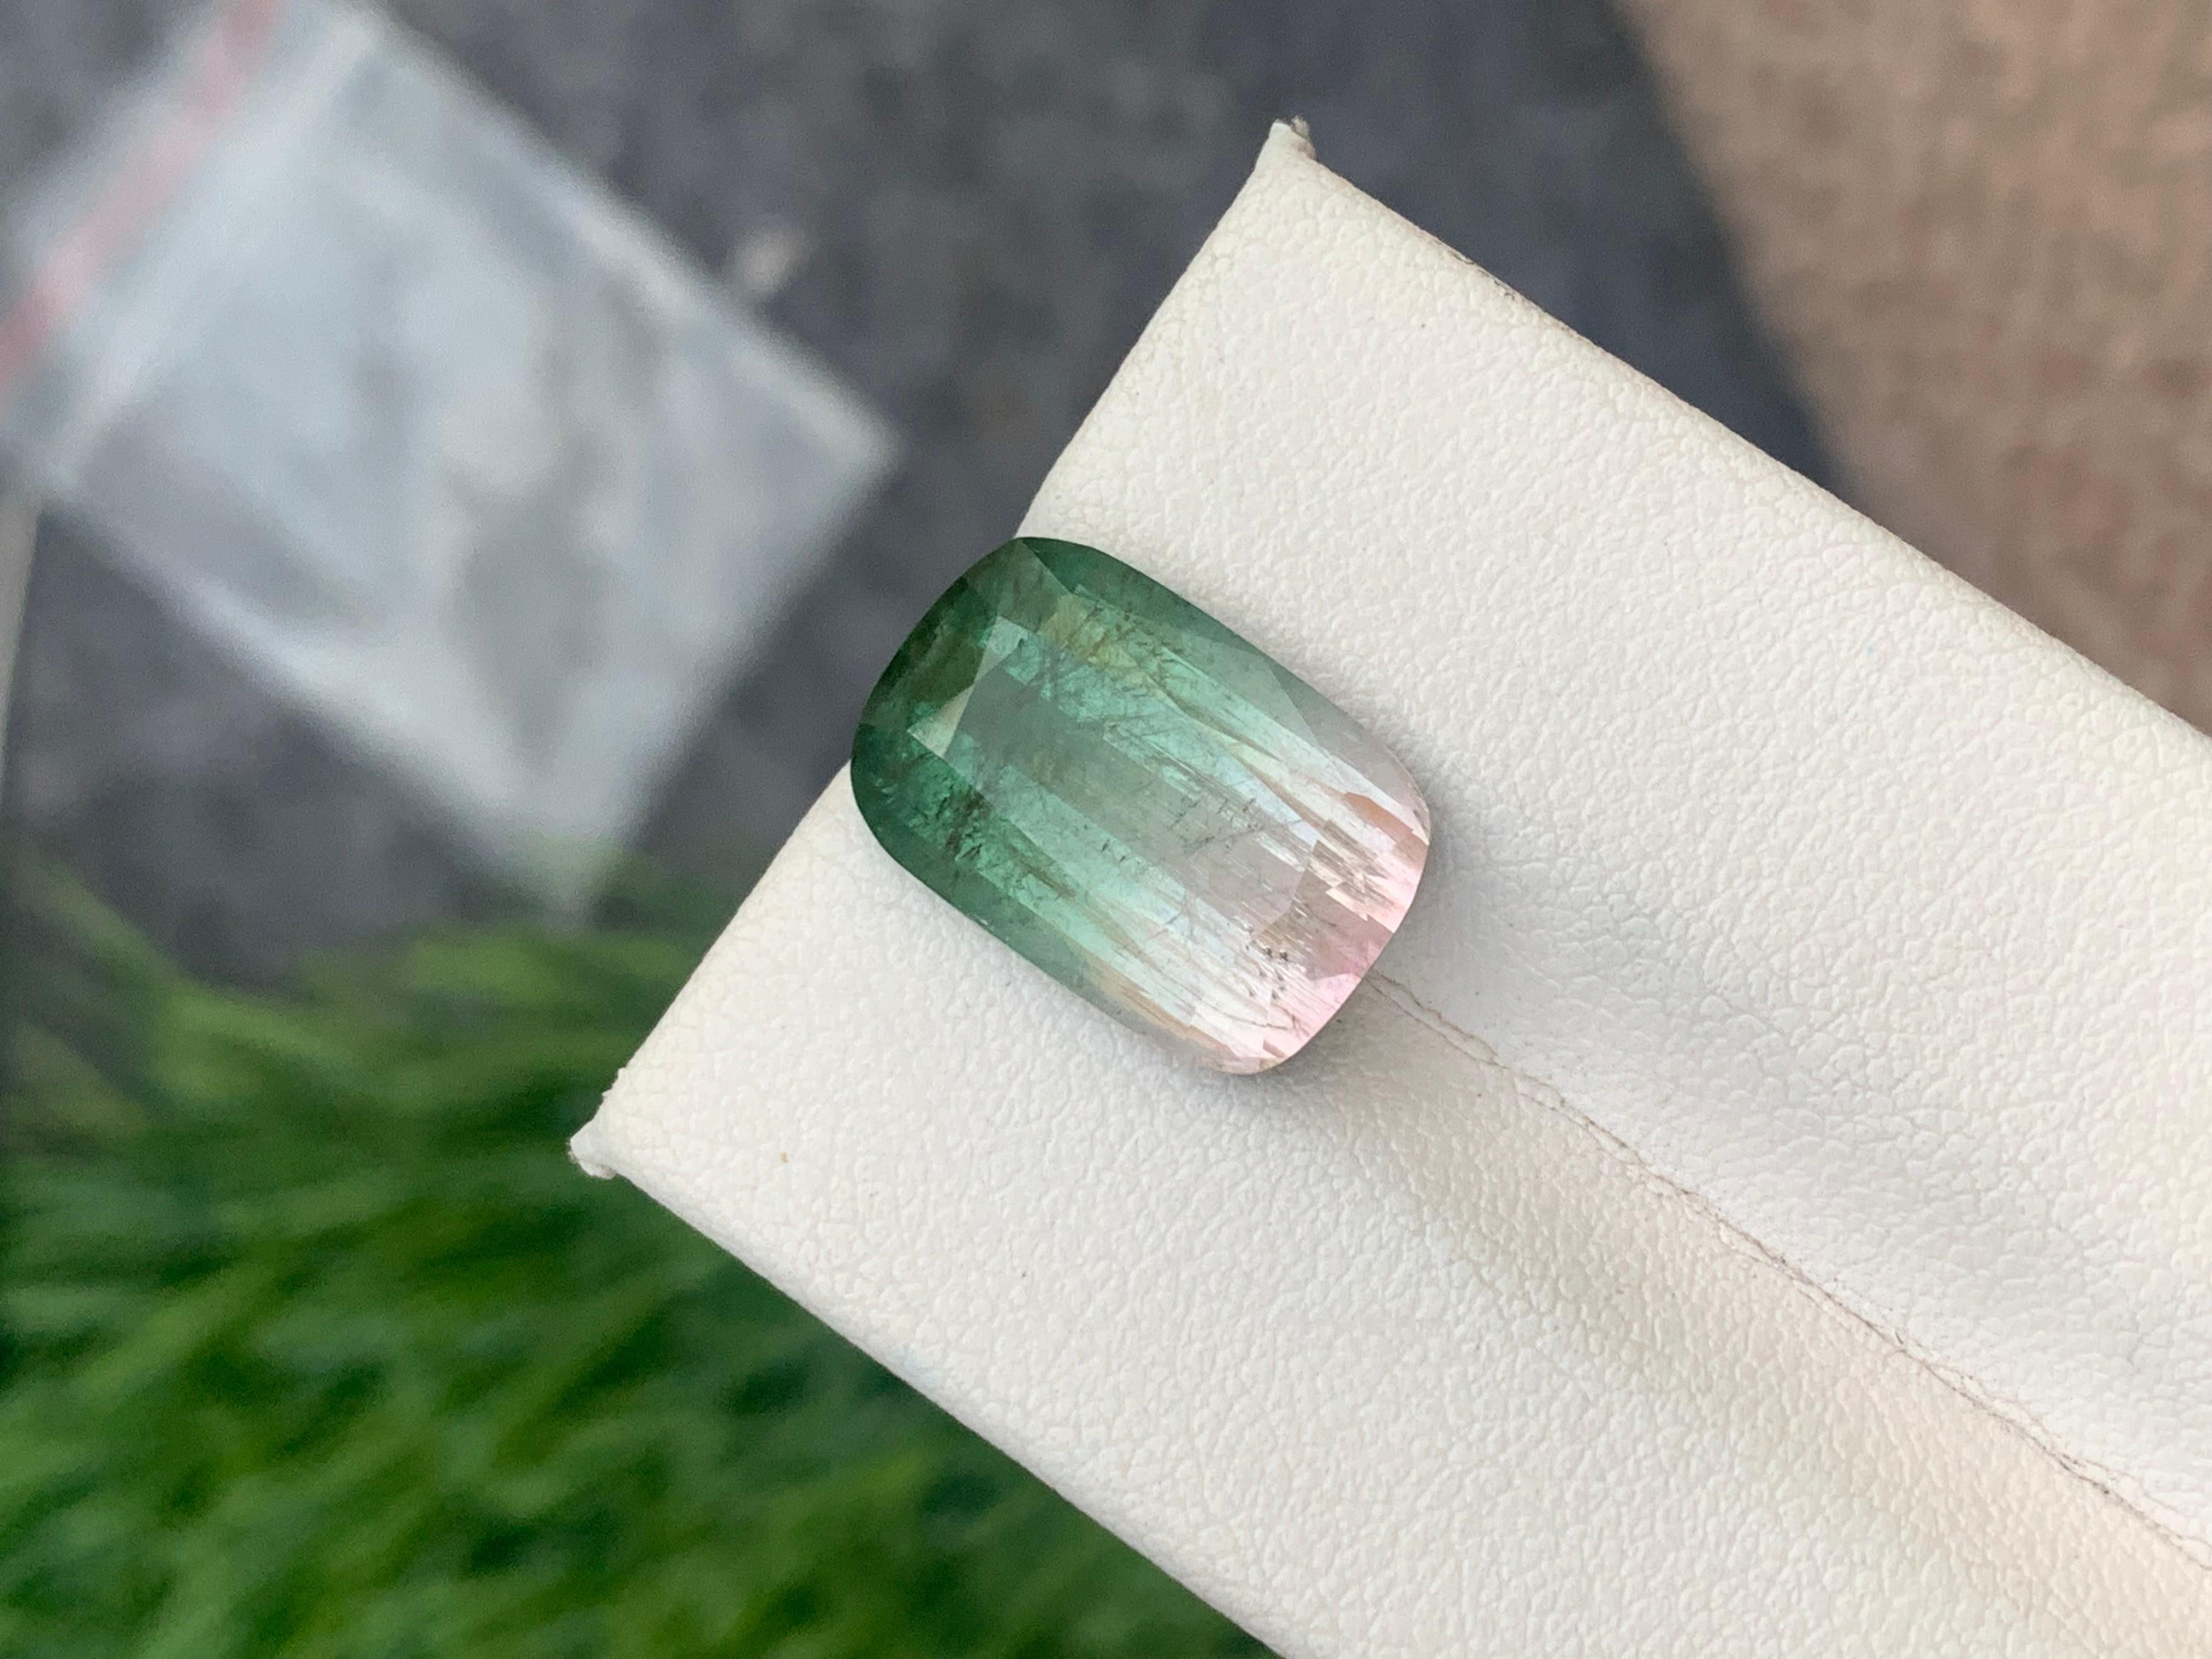 Bicolor Tourmaline 
Weight: 9.0 Carats
Dimension: 15.4x10.4x6.8 Mm
Origin: Afghanistan
Color: Pink Green
Shape: Cushion

.
Bicolor tourmaline is connected to the heart chakra, which makes it good for cleansing and removing any blockages. The stone